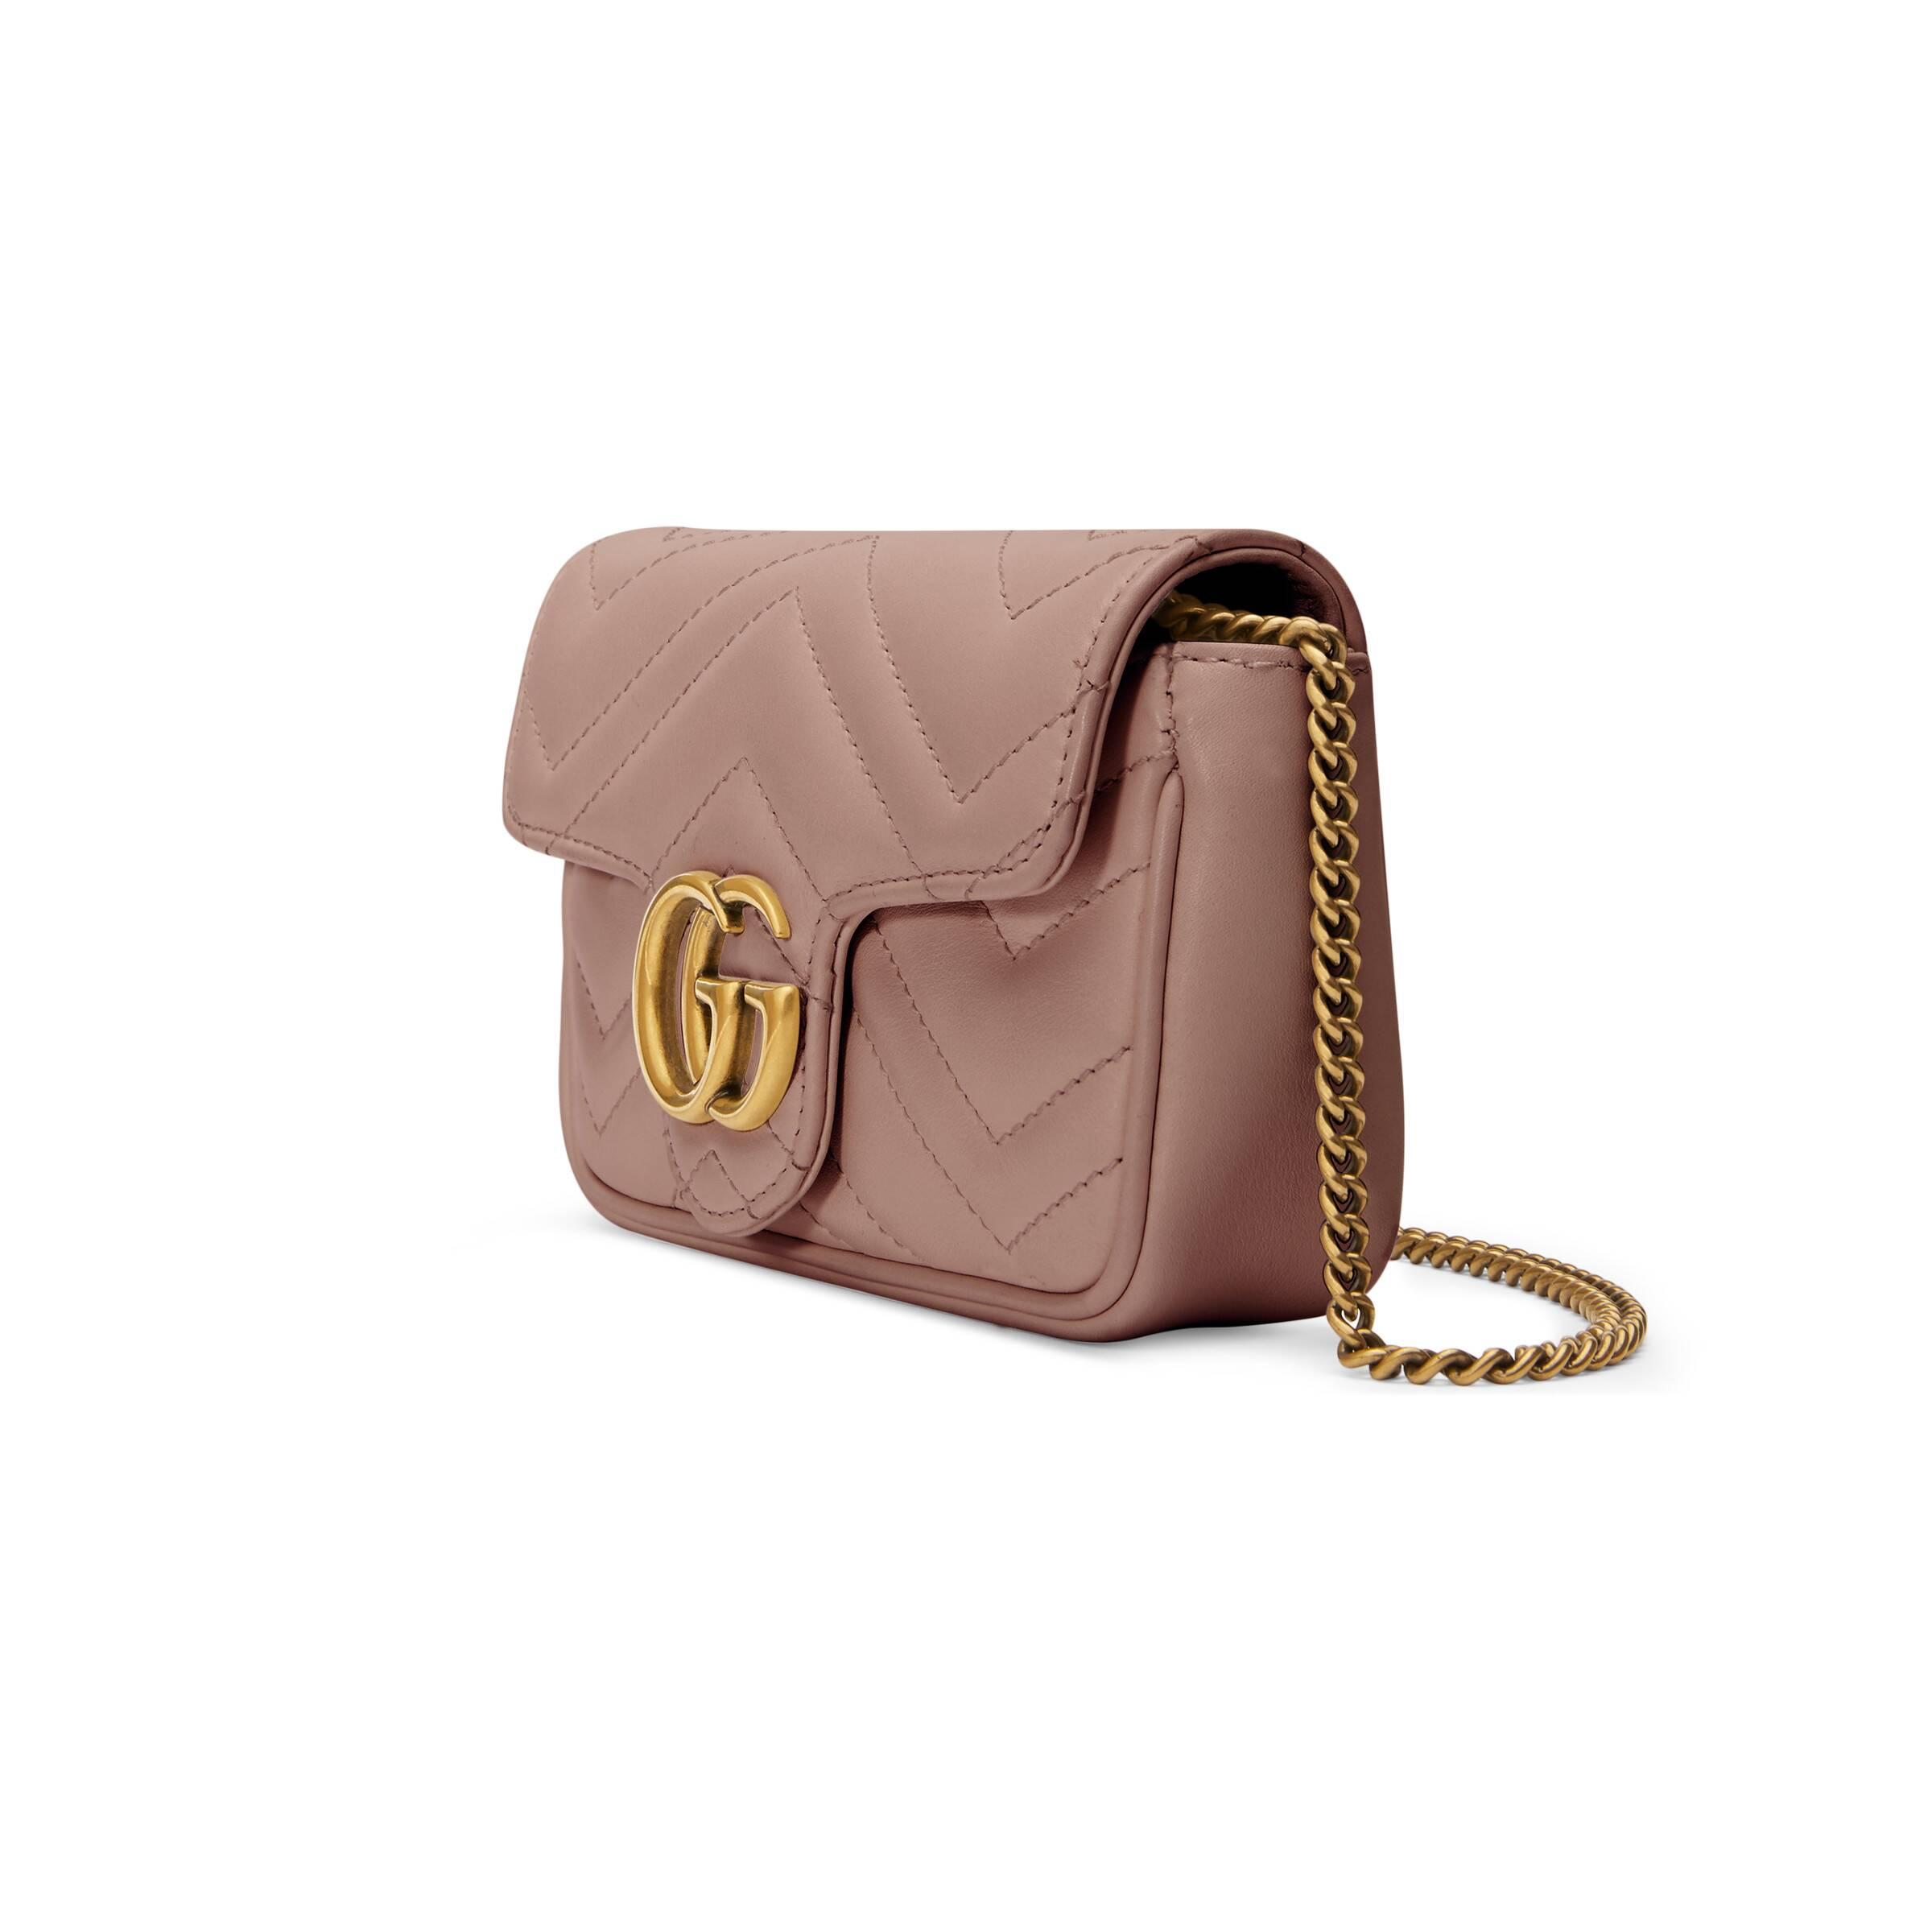 Gucci GG Marmont Matelassé Leather Super Mini Bag in Dusty Pink Chevron Leather (Pink) - Lyst